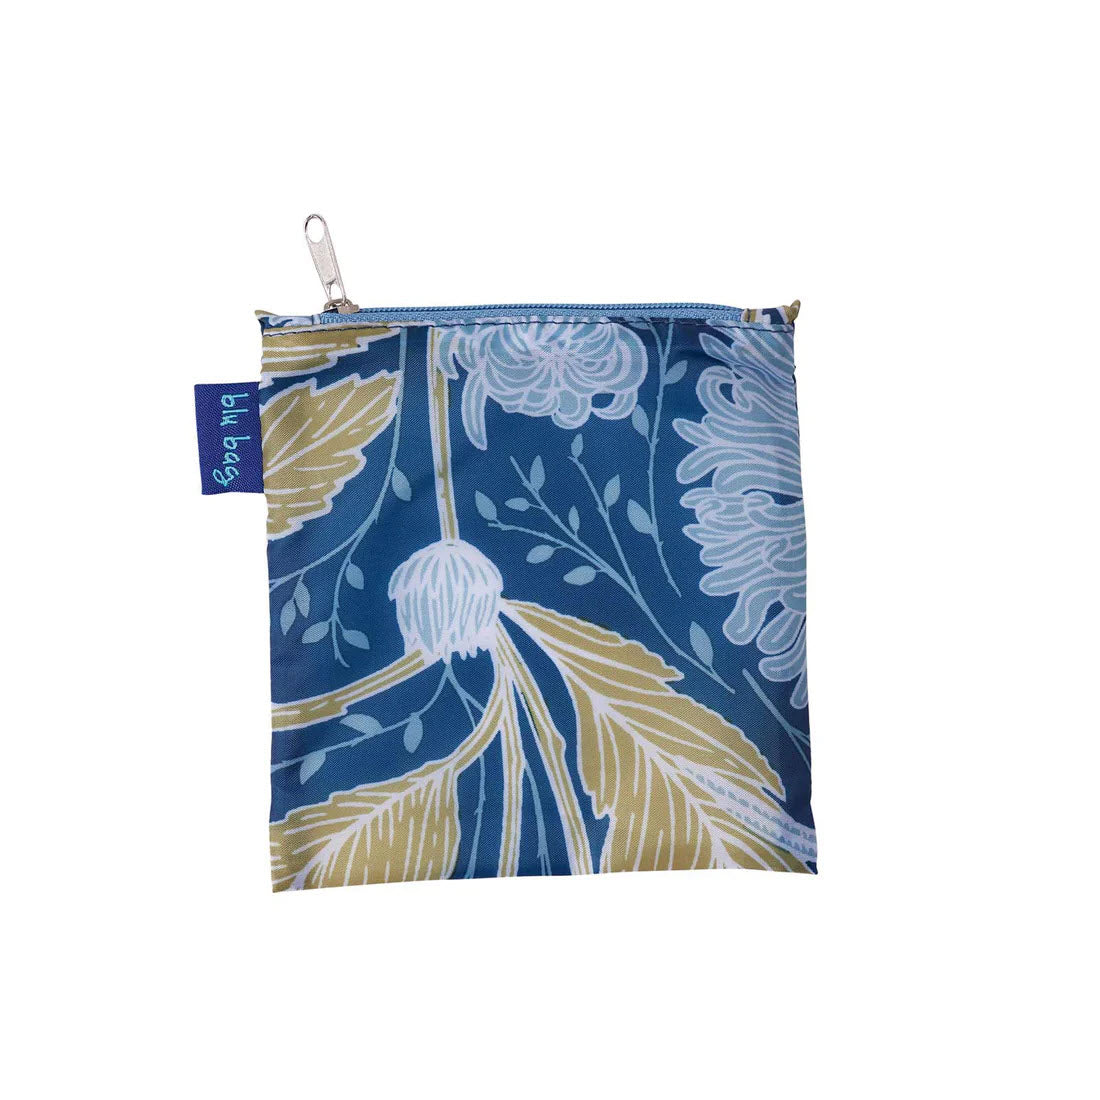 A blue floral print eco-friendly BLU BAG CHRYSANTHEMUM tote with a zipper and a fabric tag on the side by Rockflowerpaper.